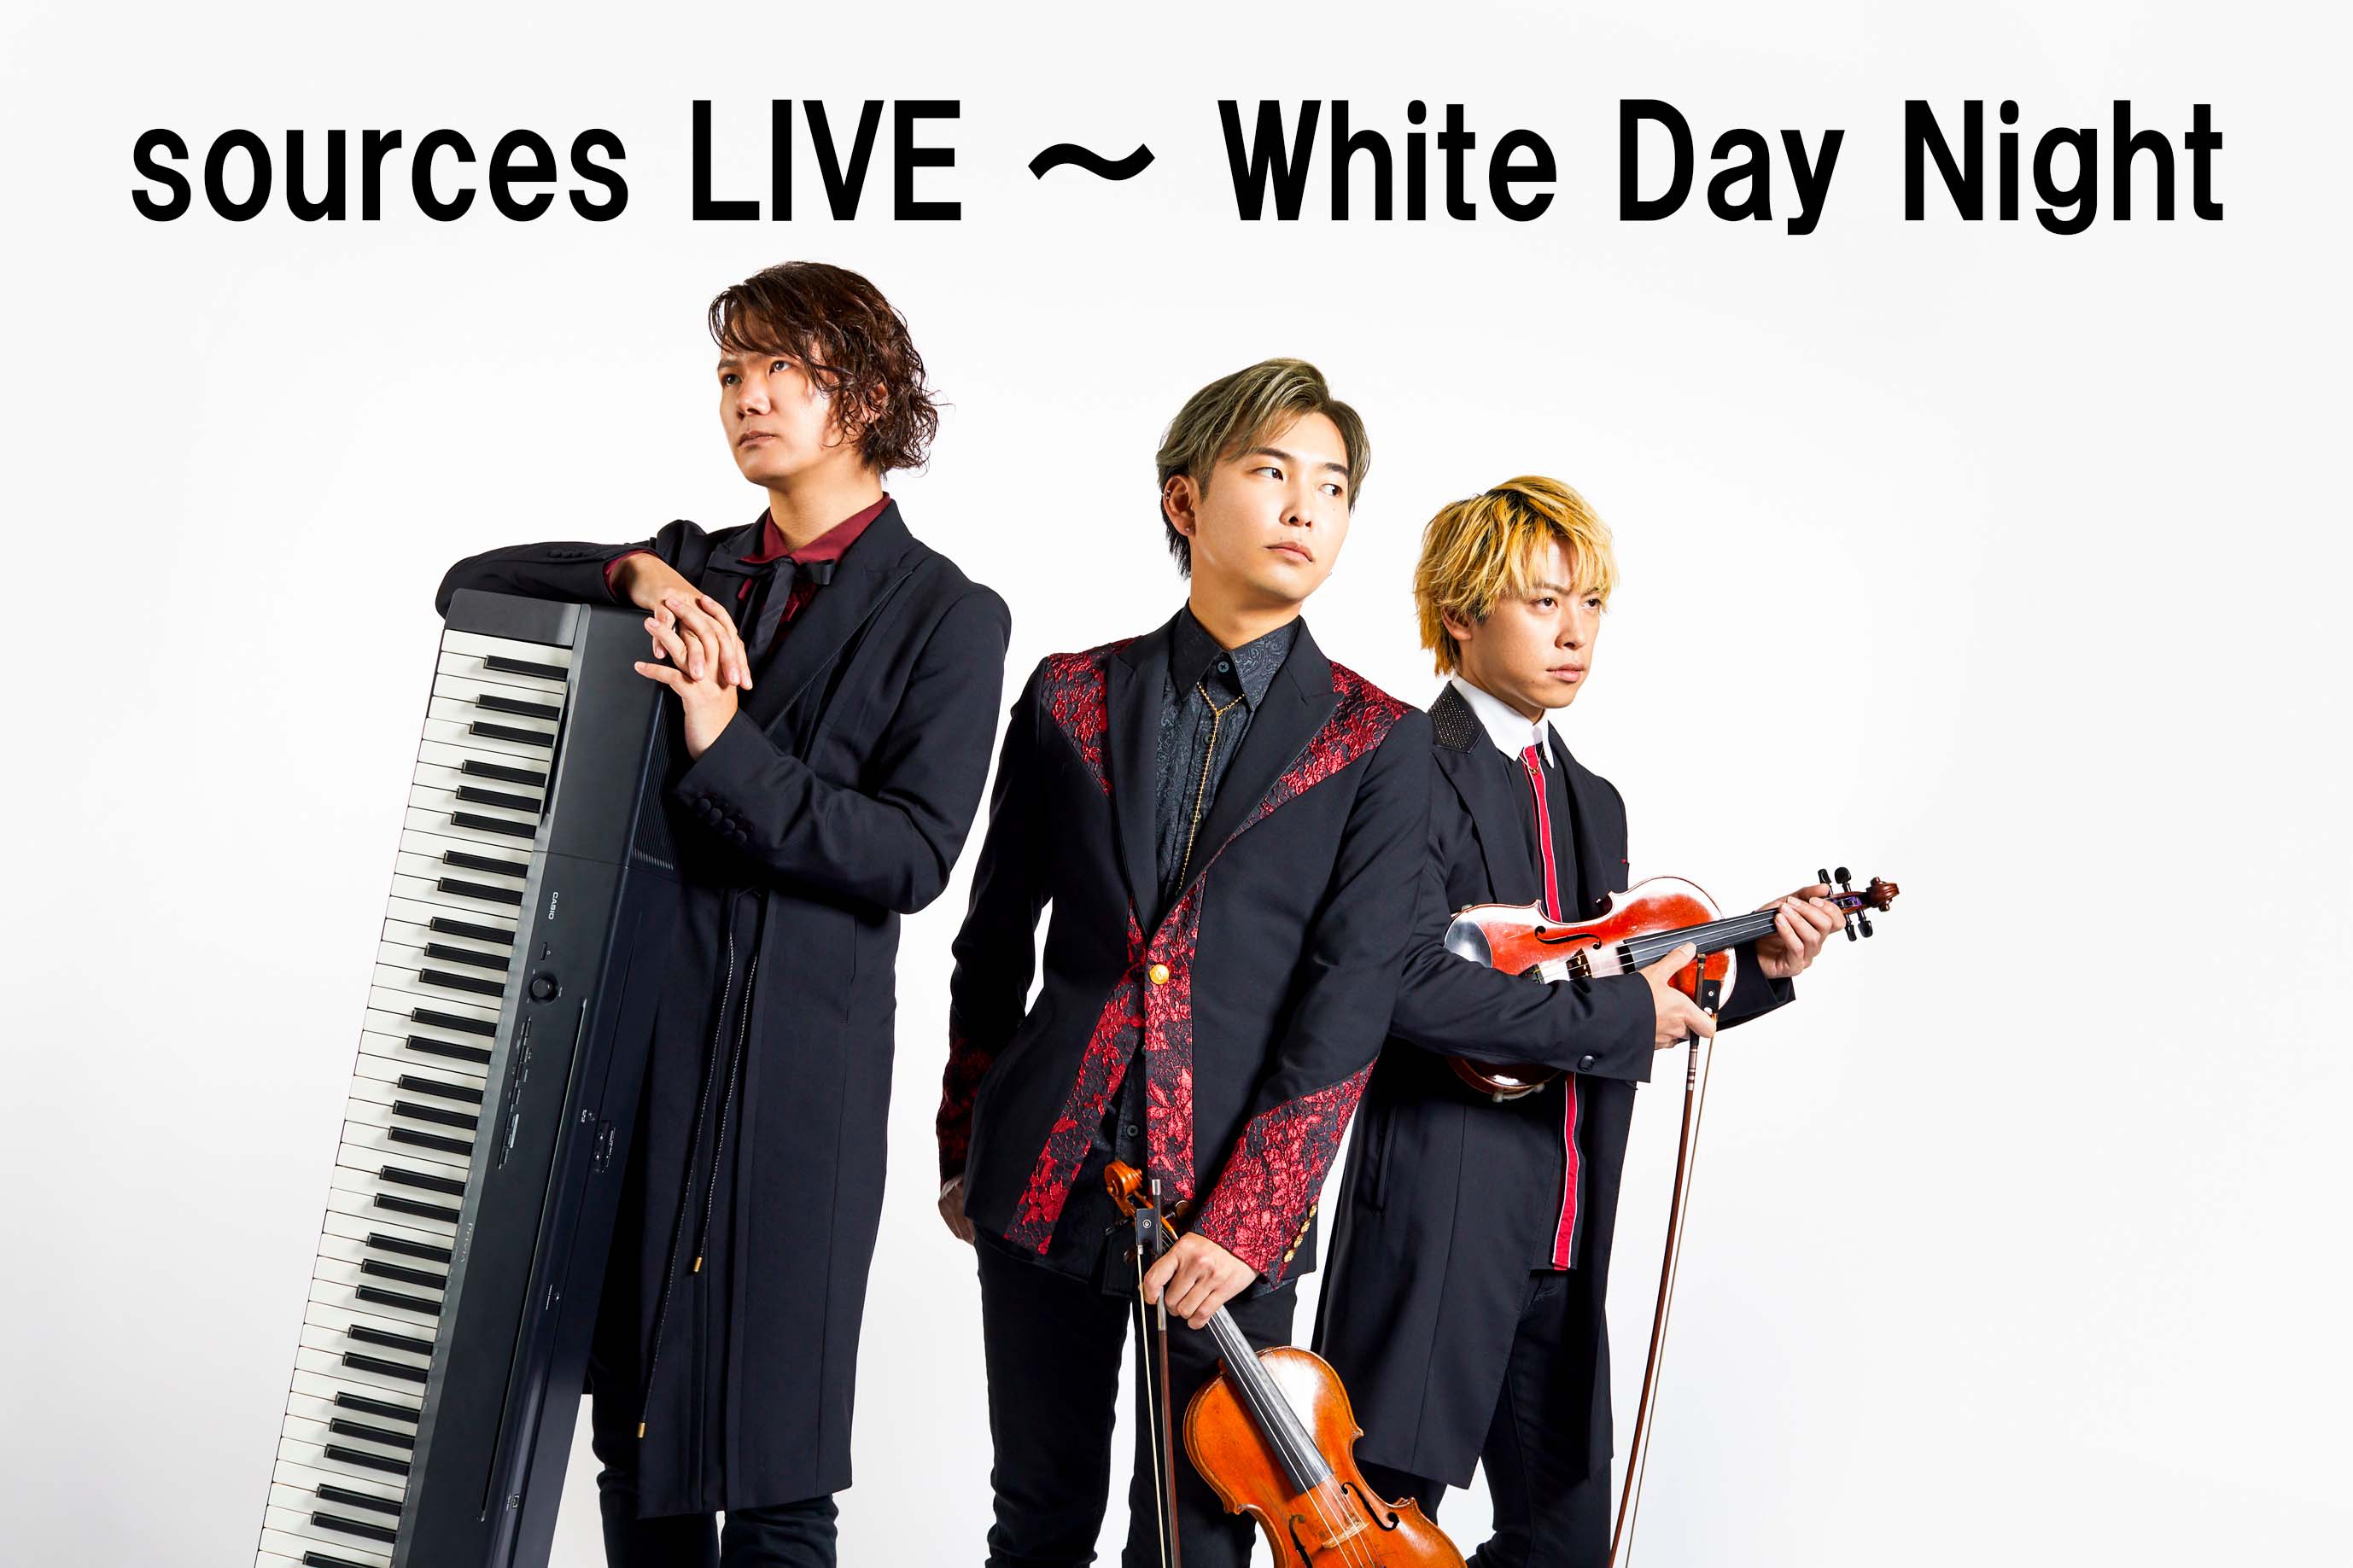 sources LIVE ～ White Day Night